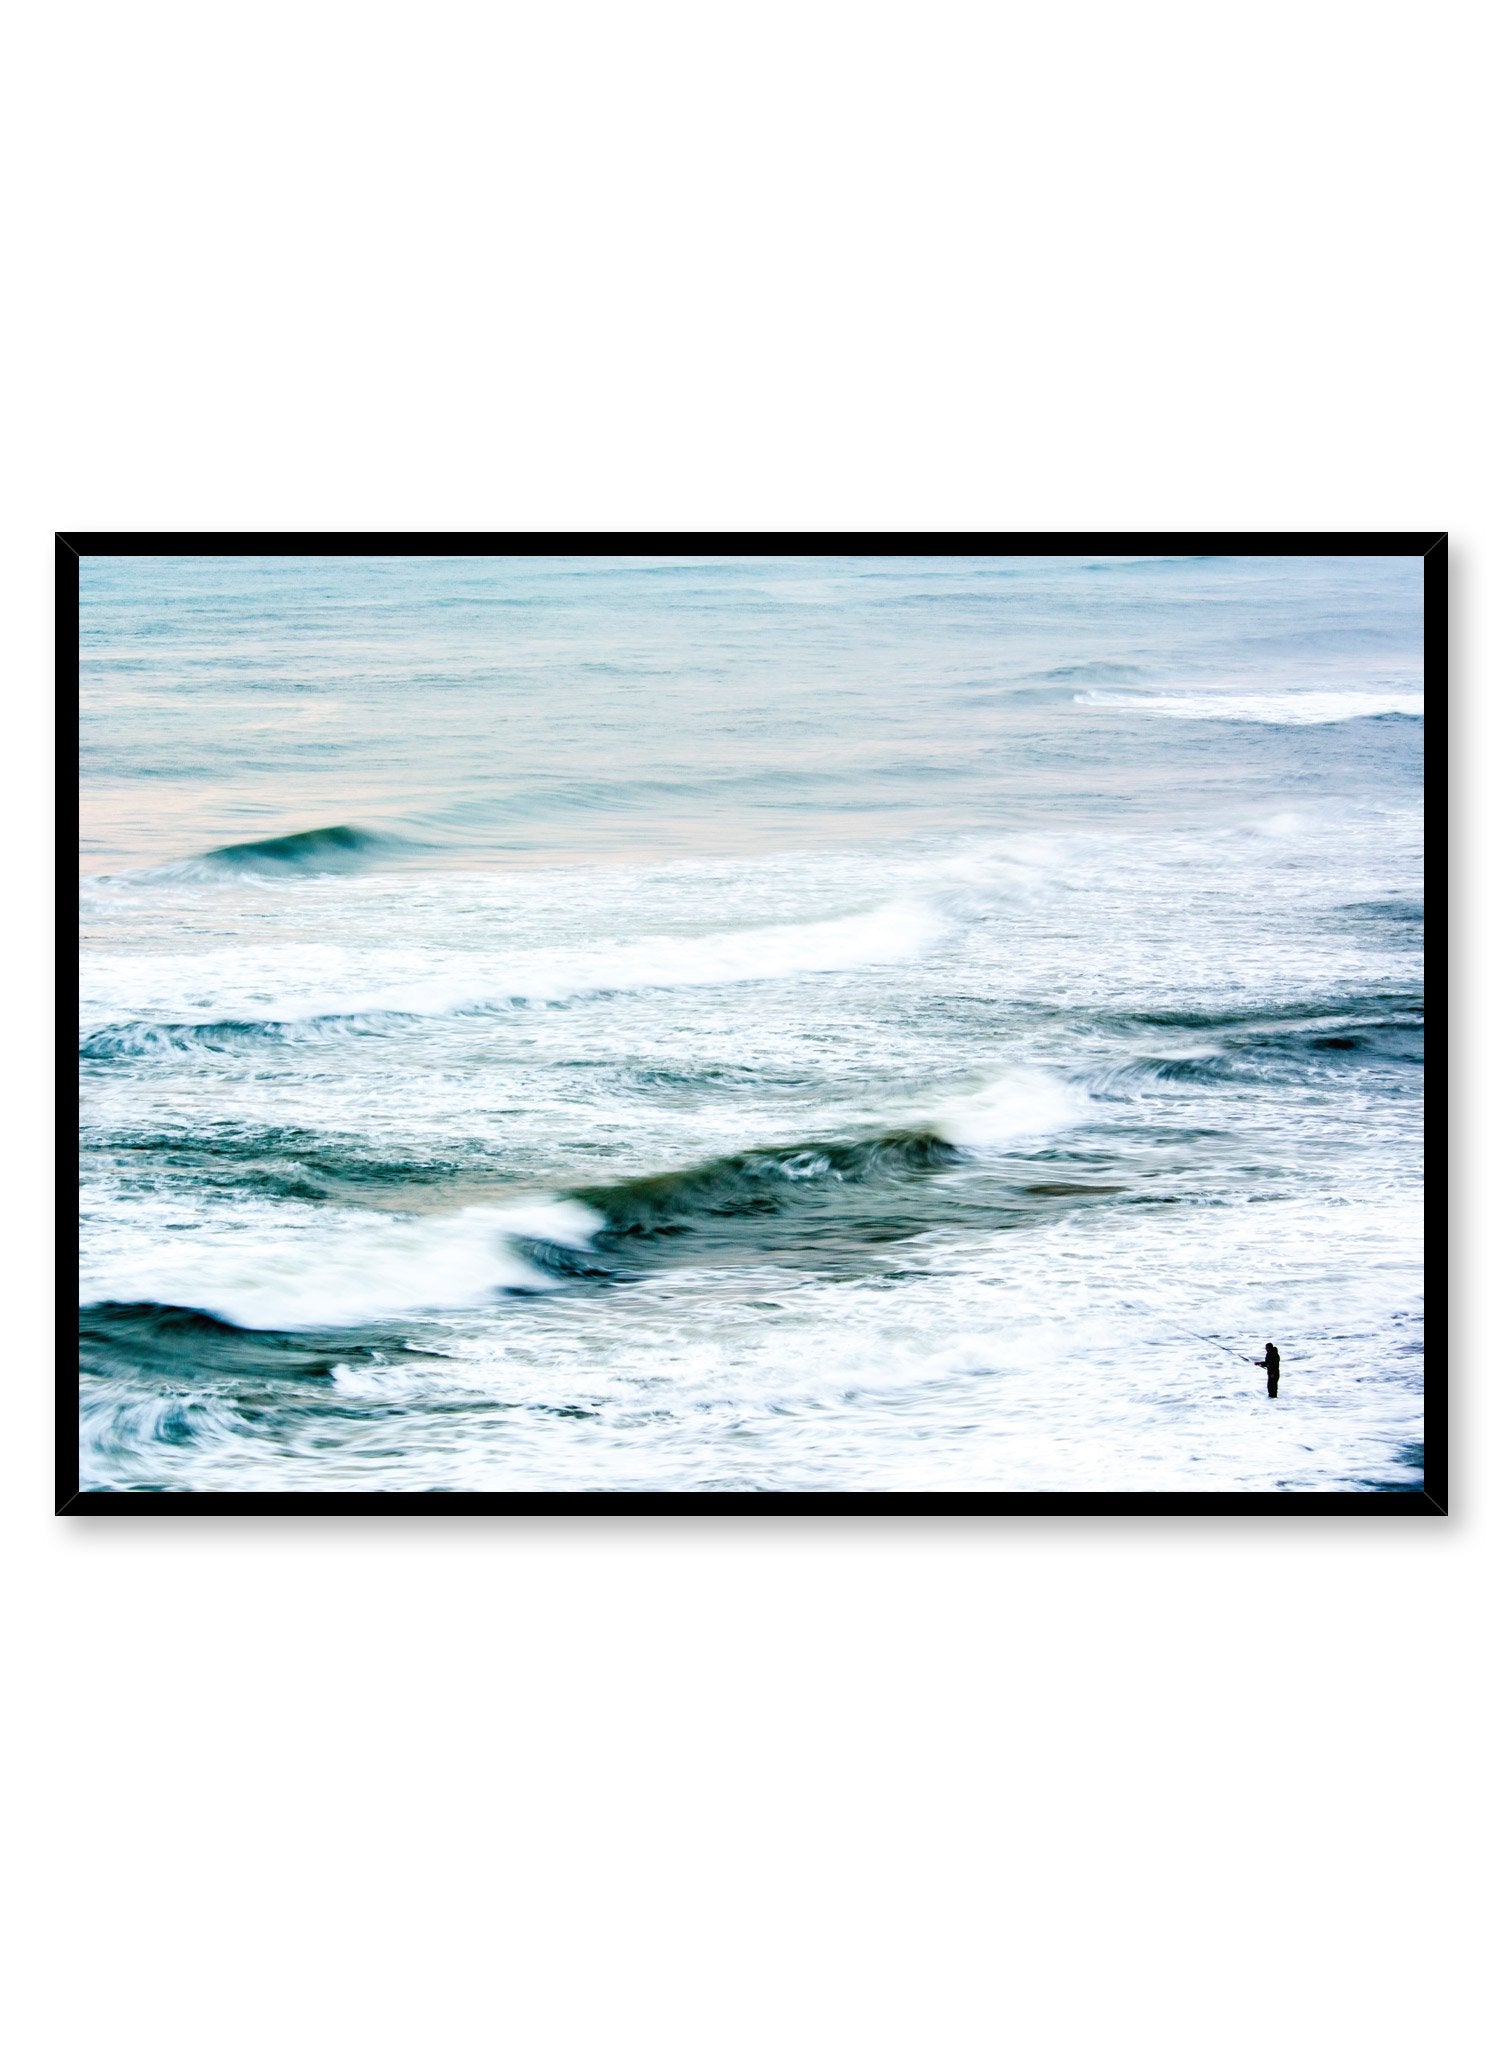 Modern minimalist landscape photography poster by Opposite Wall with blue ocean waves.